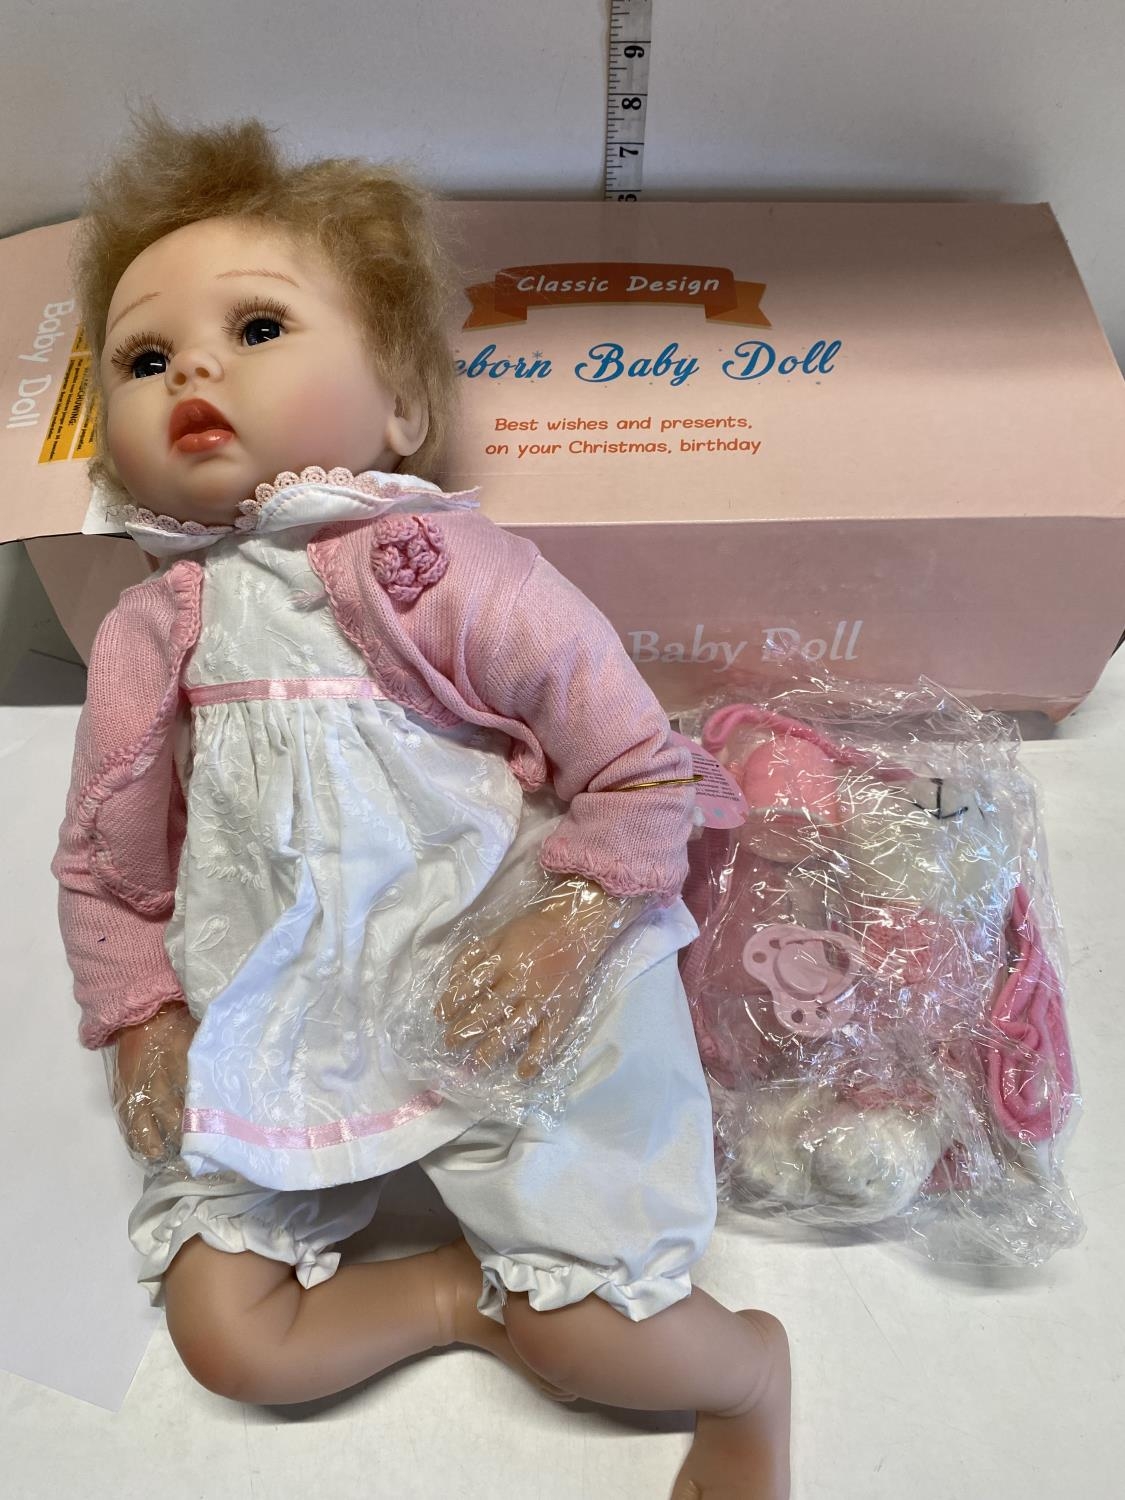 A boxed Reborn baby doll